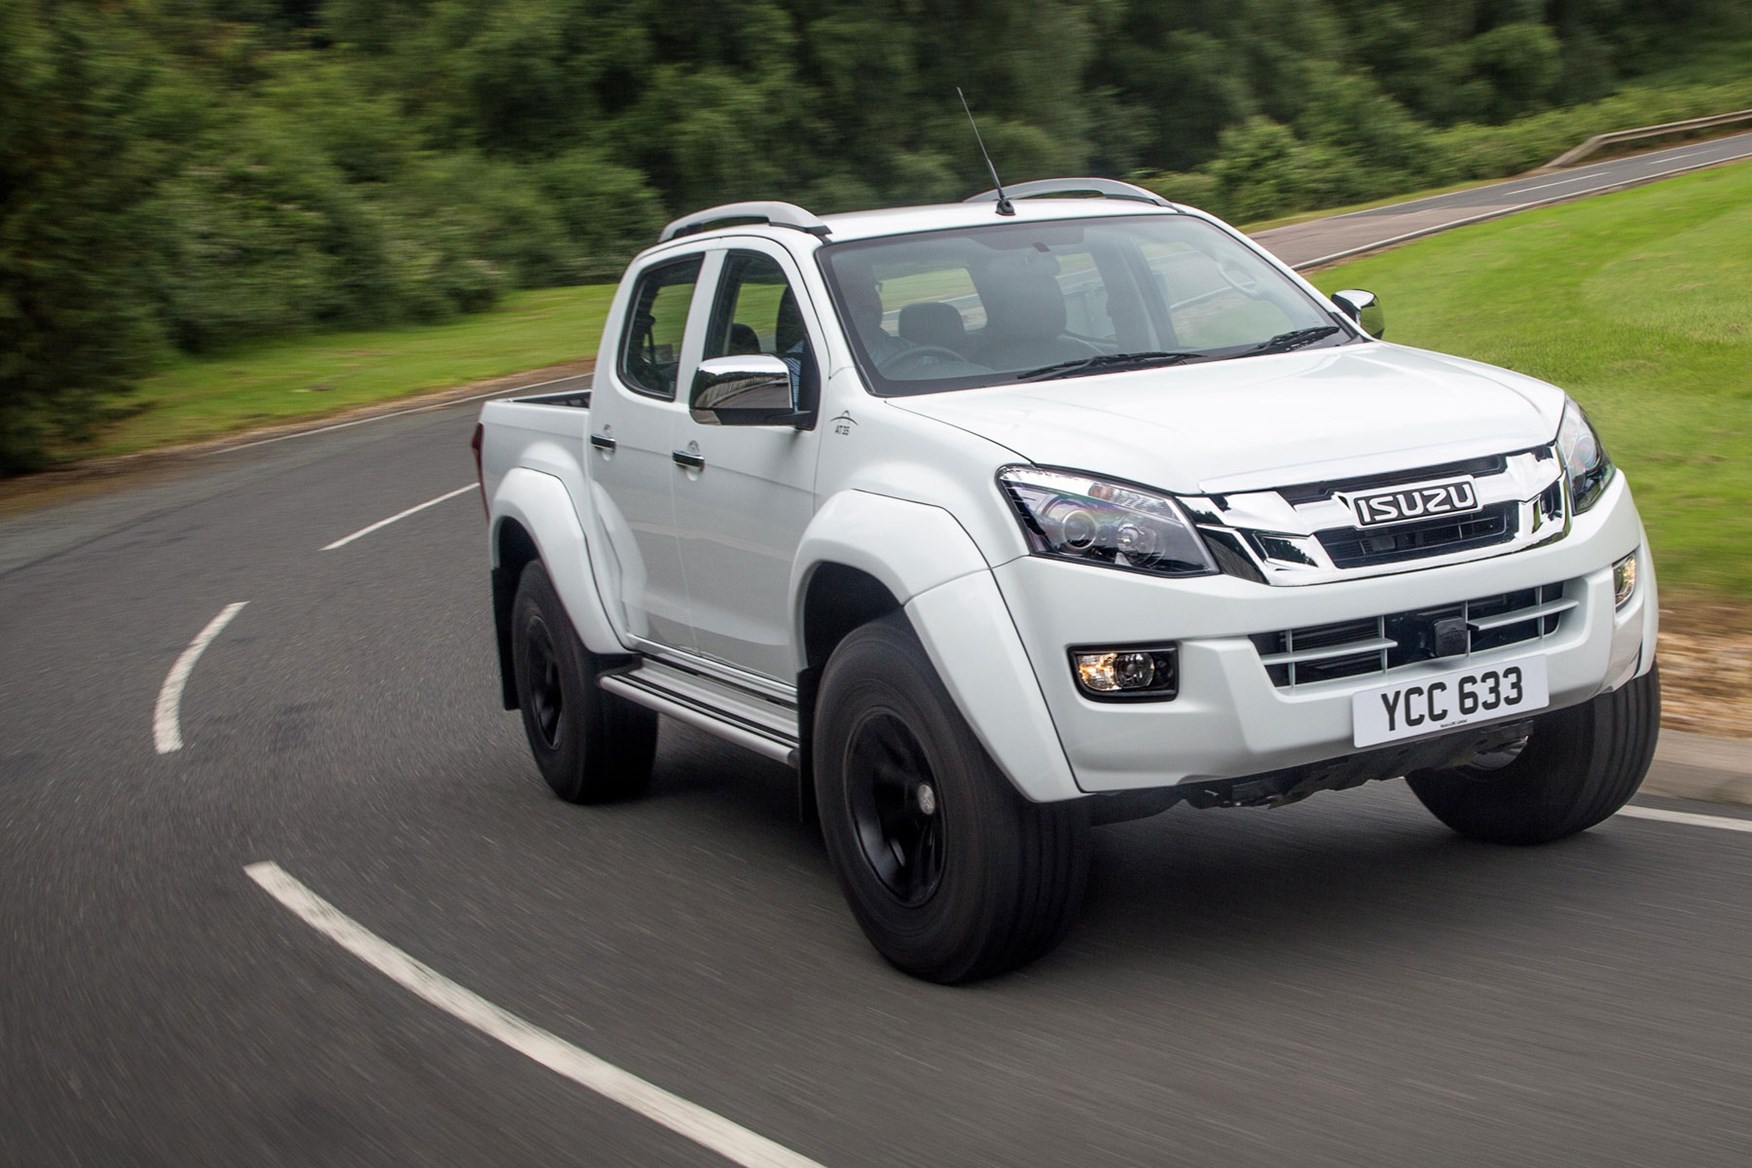 Isuzu D-Max AT35 2.5 review - front view, driving on road, white